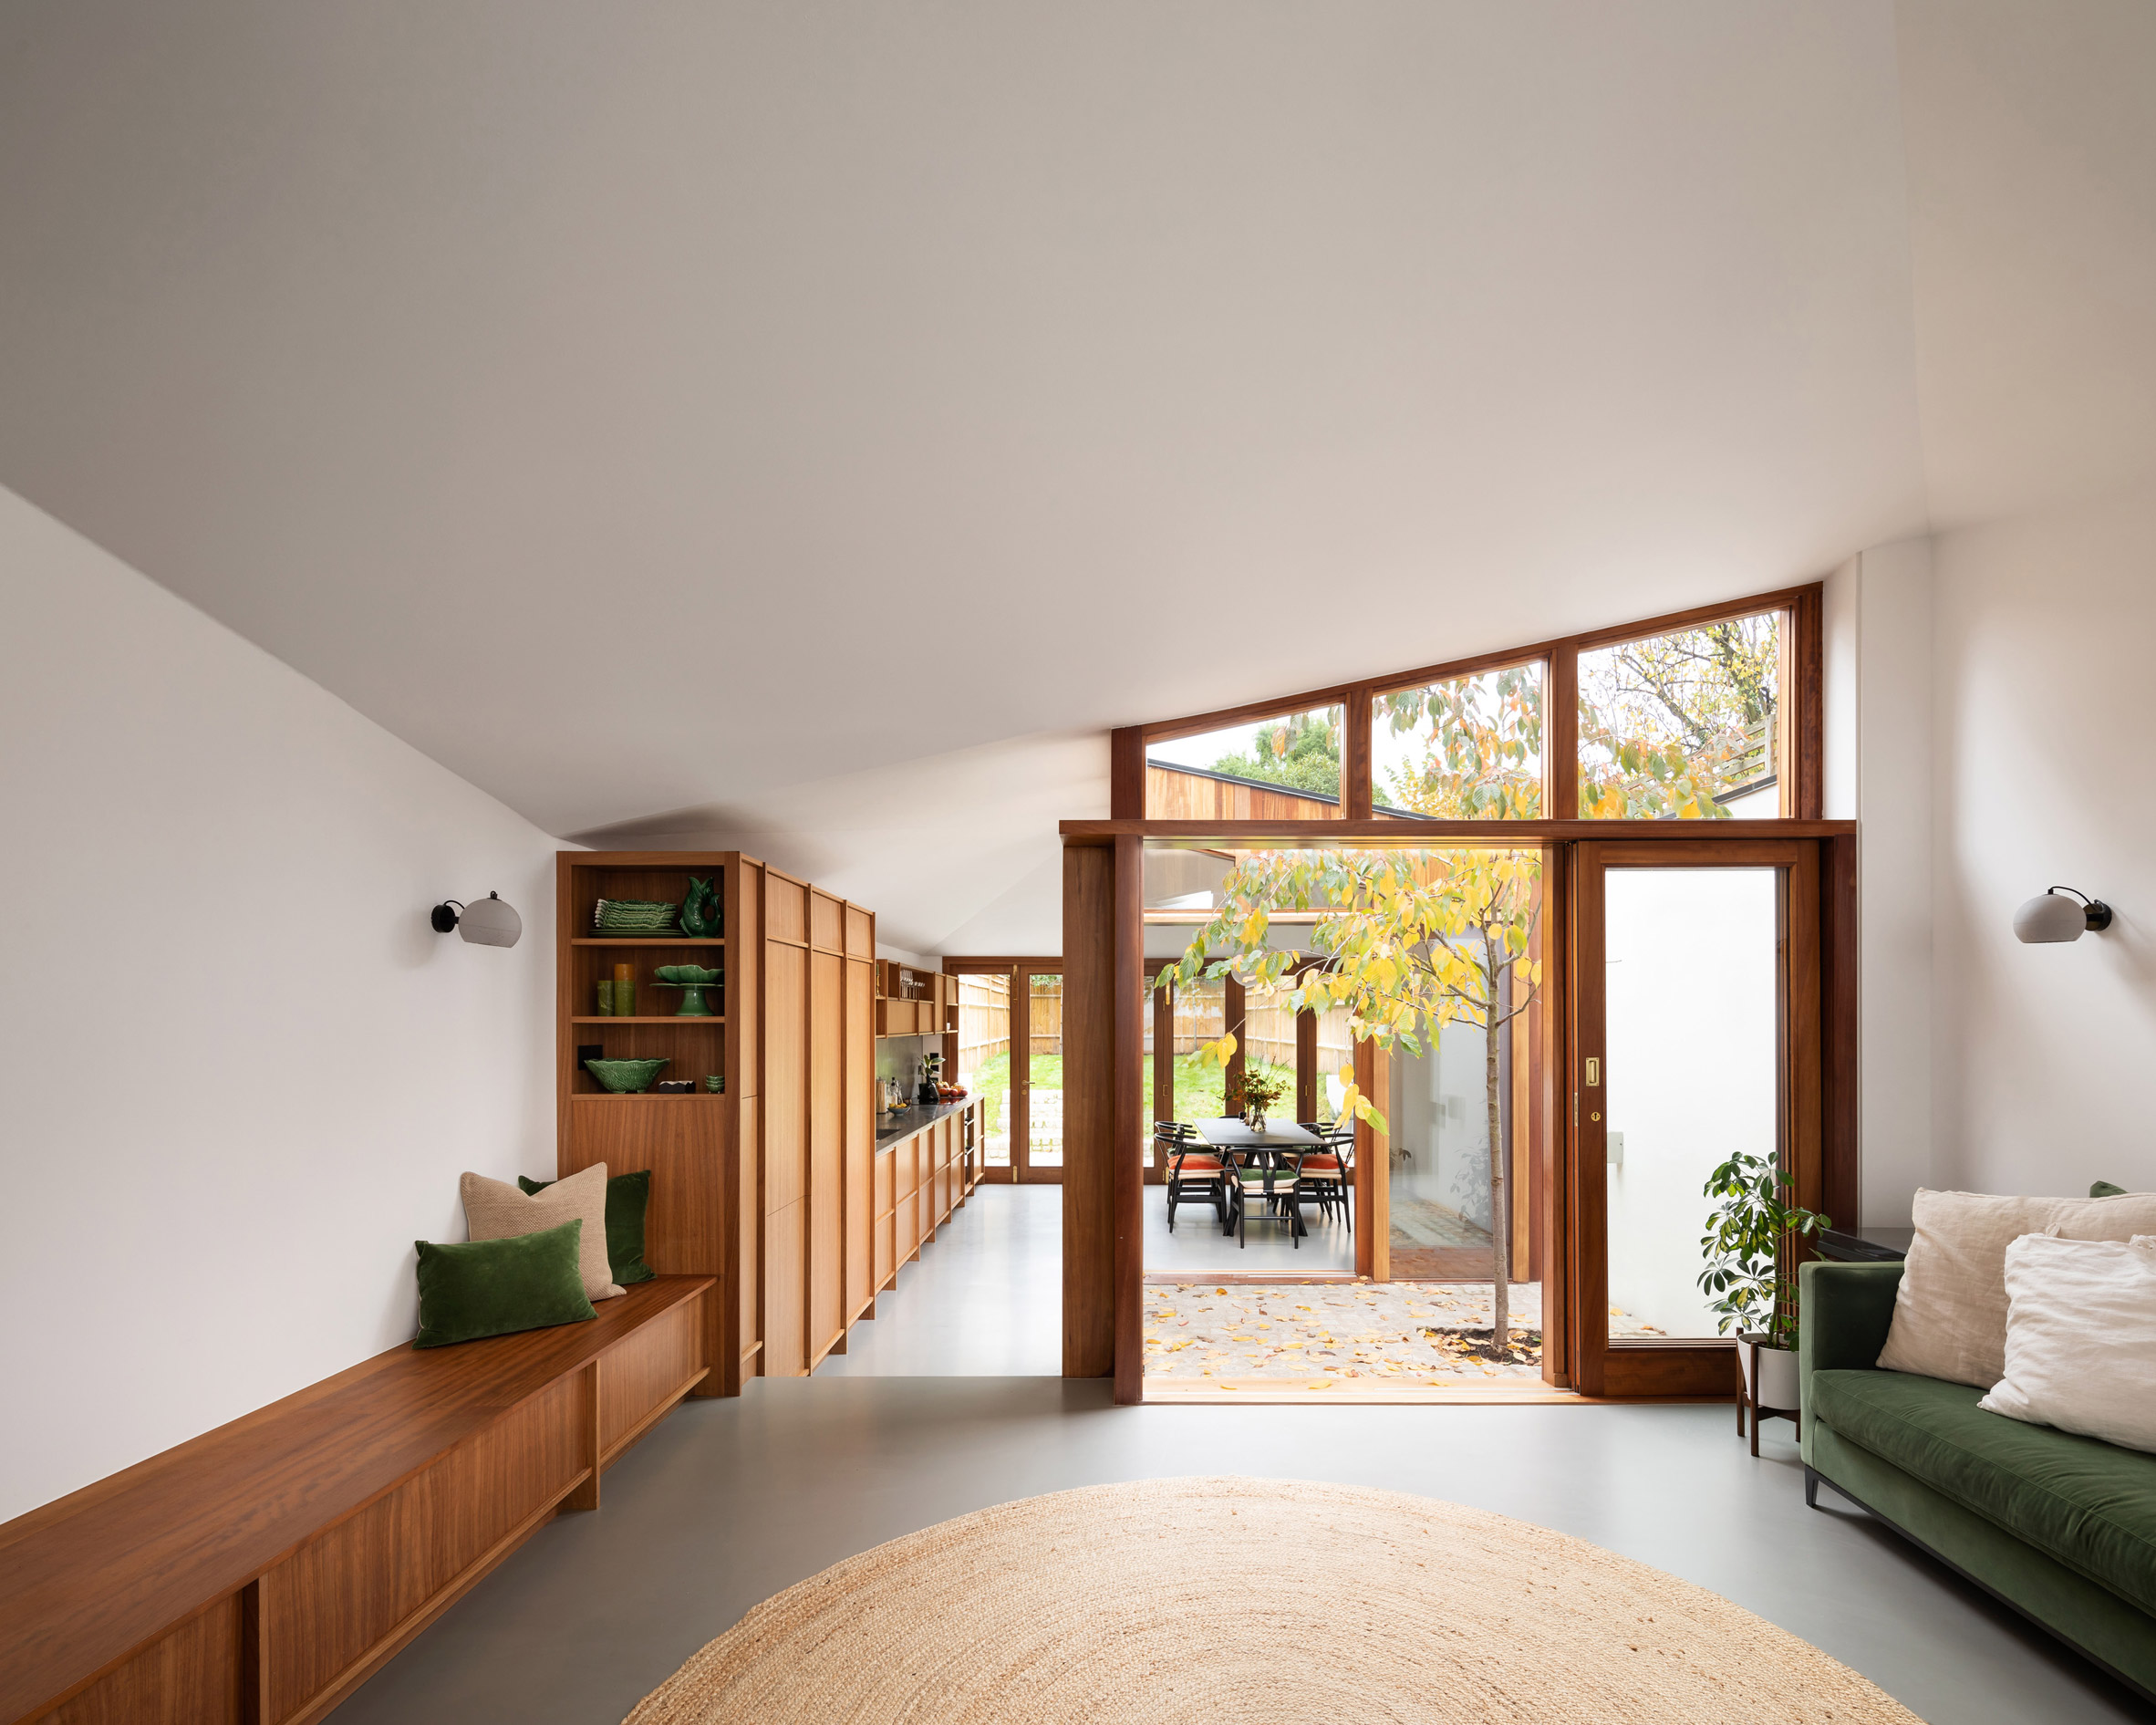 A living room punctured by a courtyard